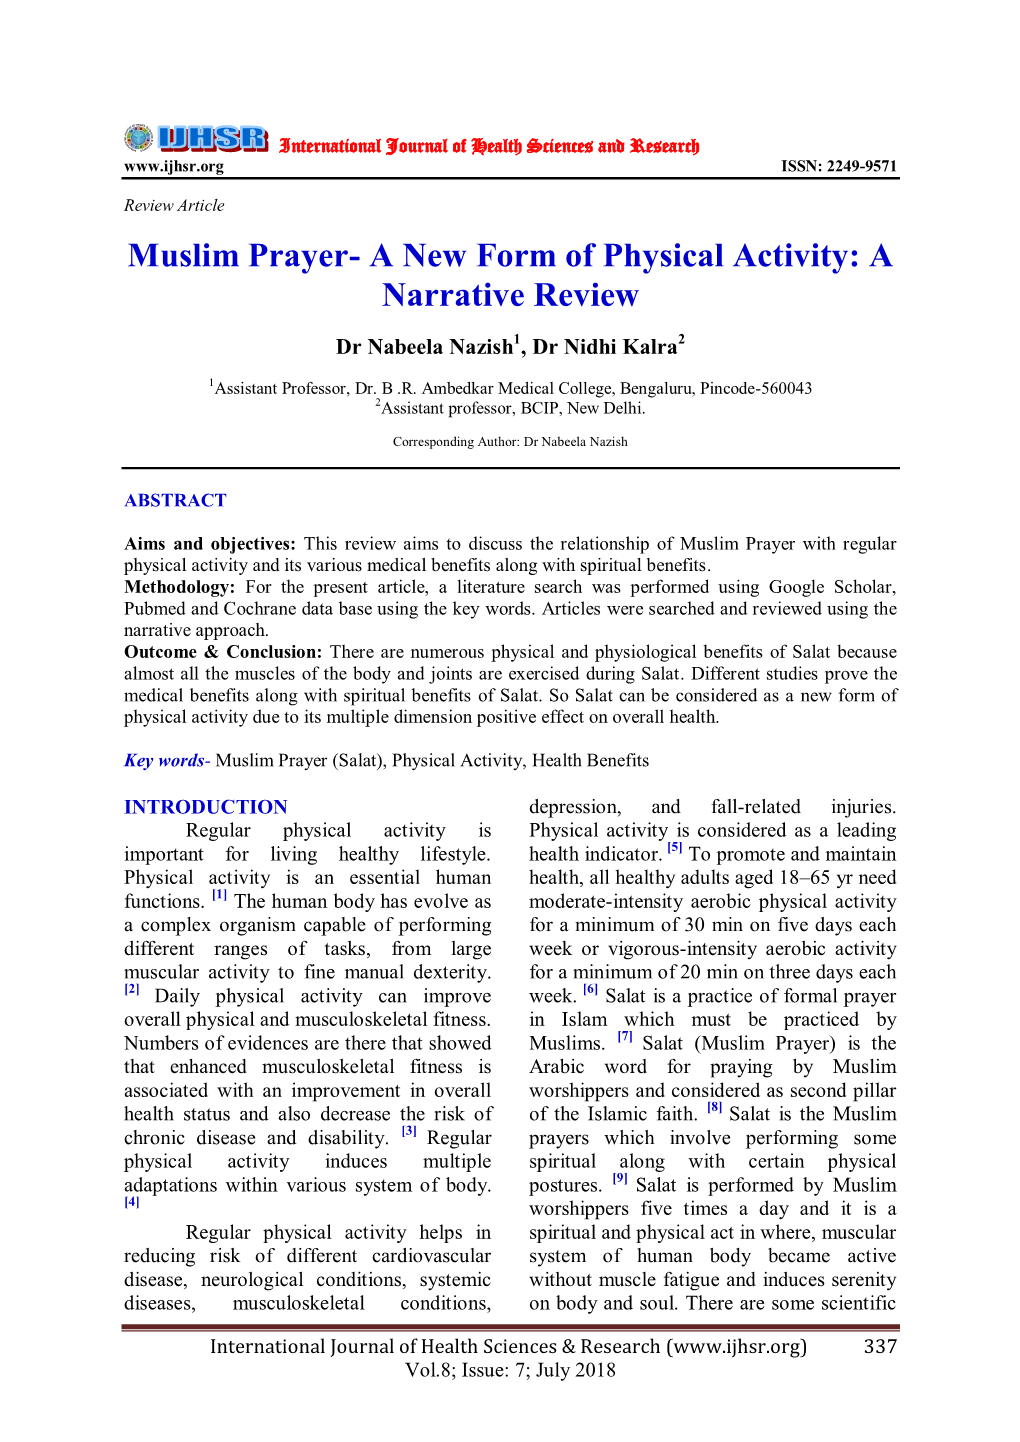 Muslim Prayer- a New Form of Physical Activity: a Narrative Review